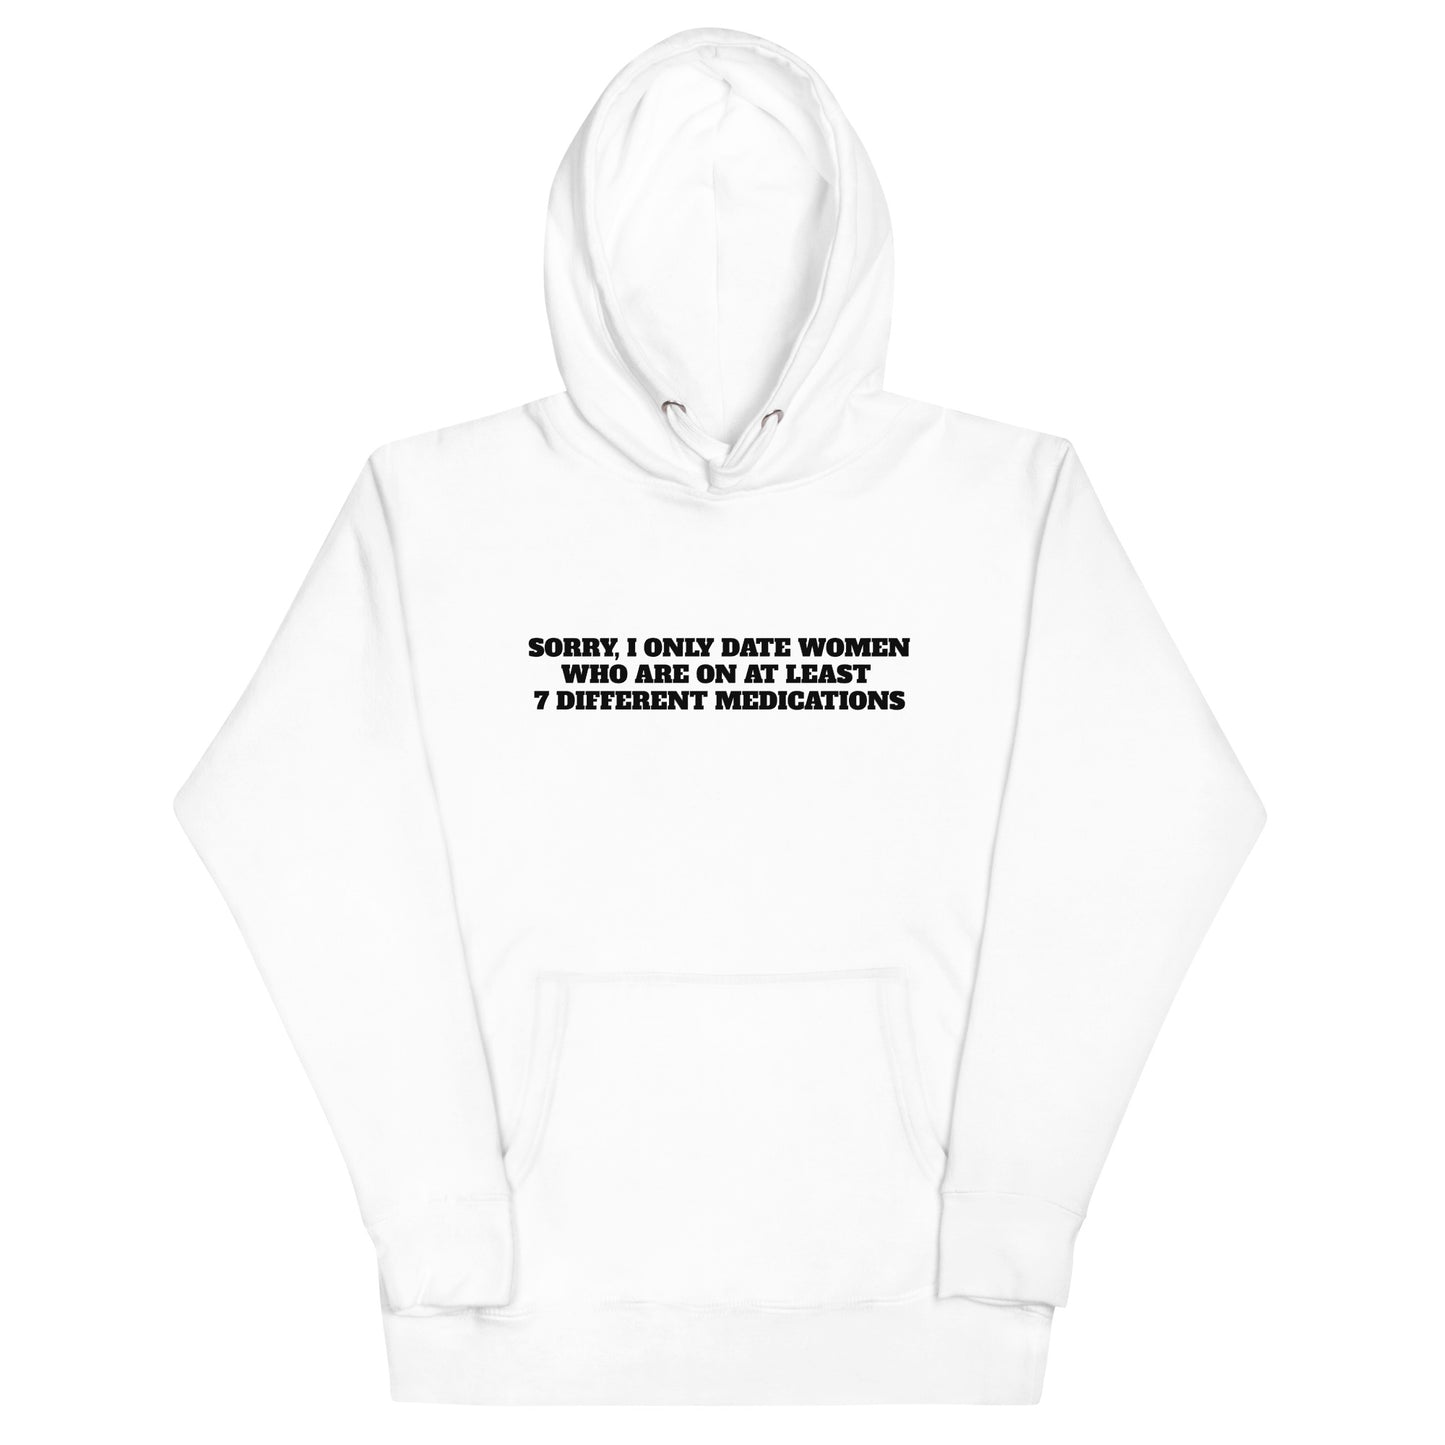 7 Different Medications Hoodie